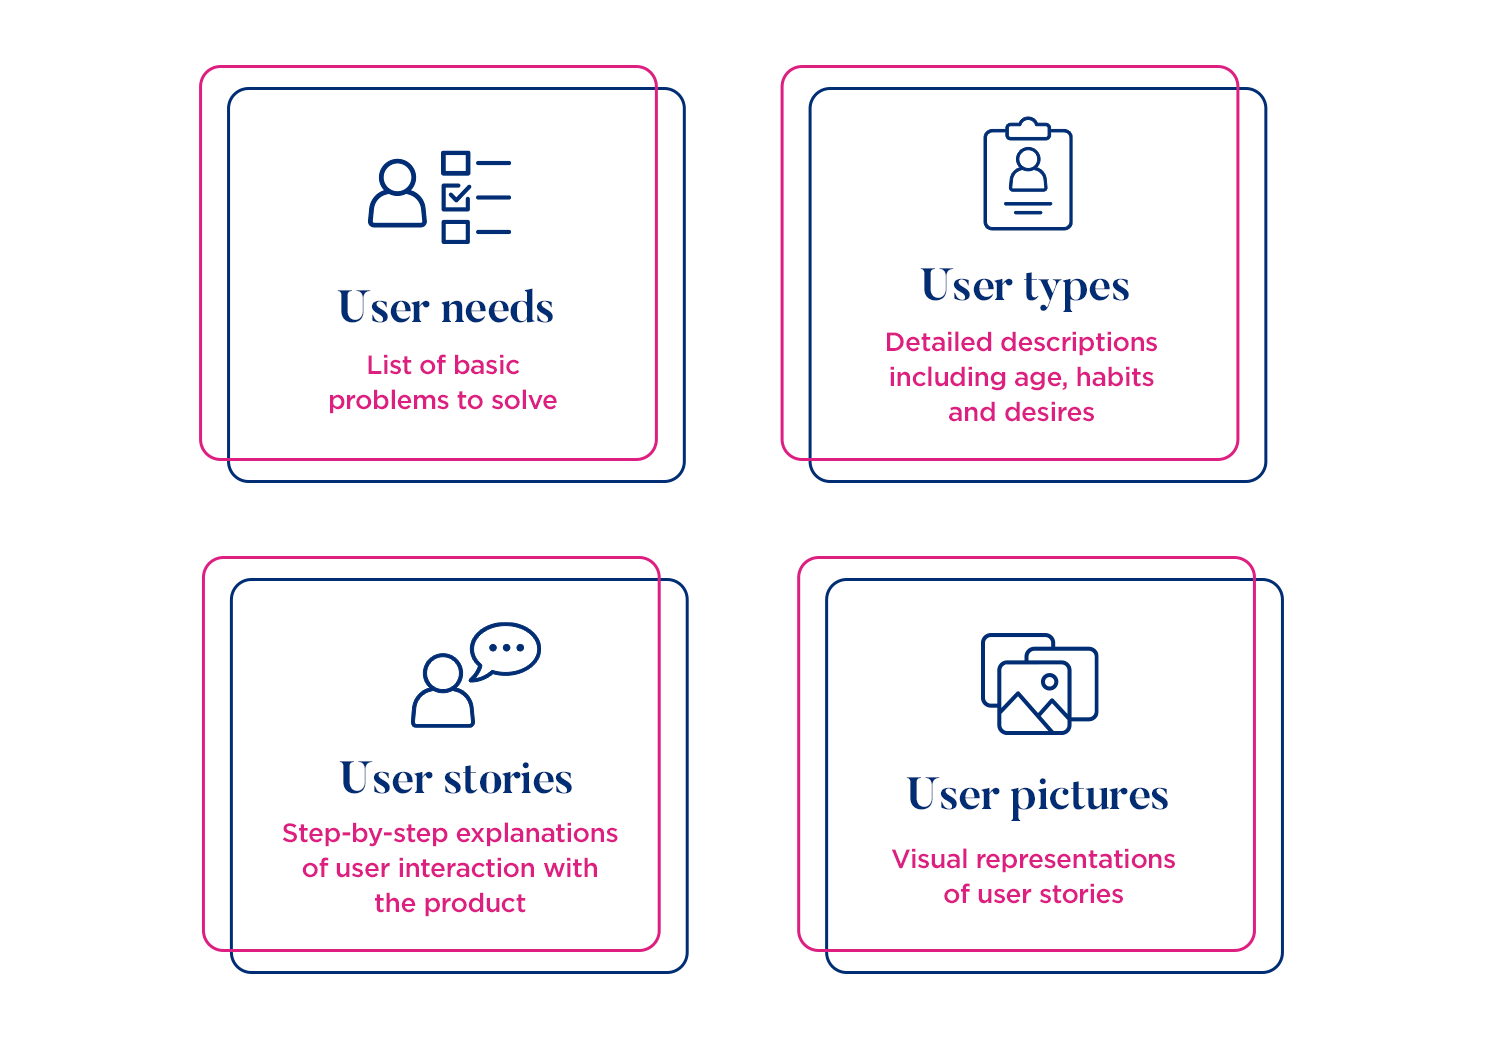 Visual representation of user needs, user types, user stories, and user pictures